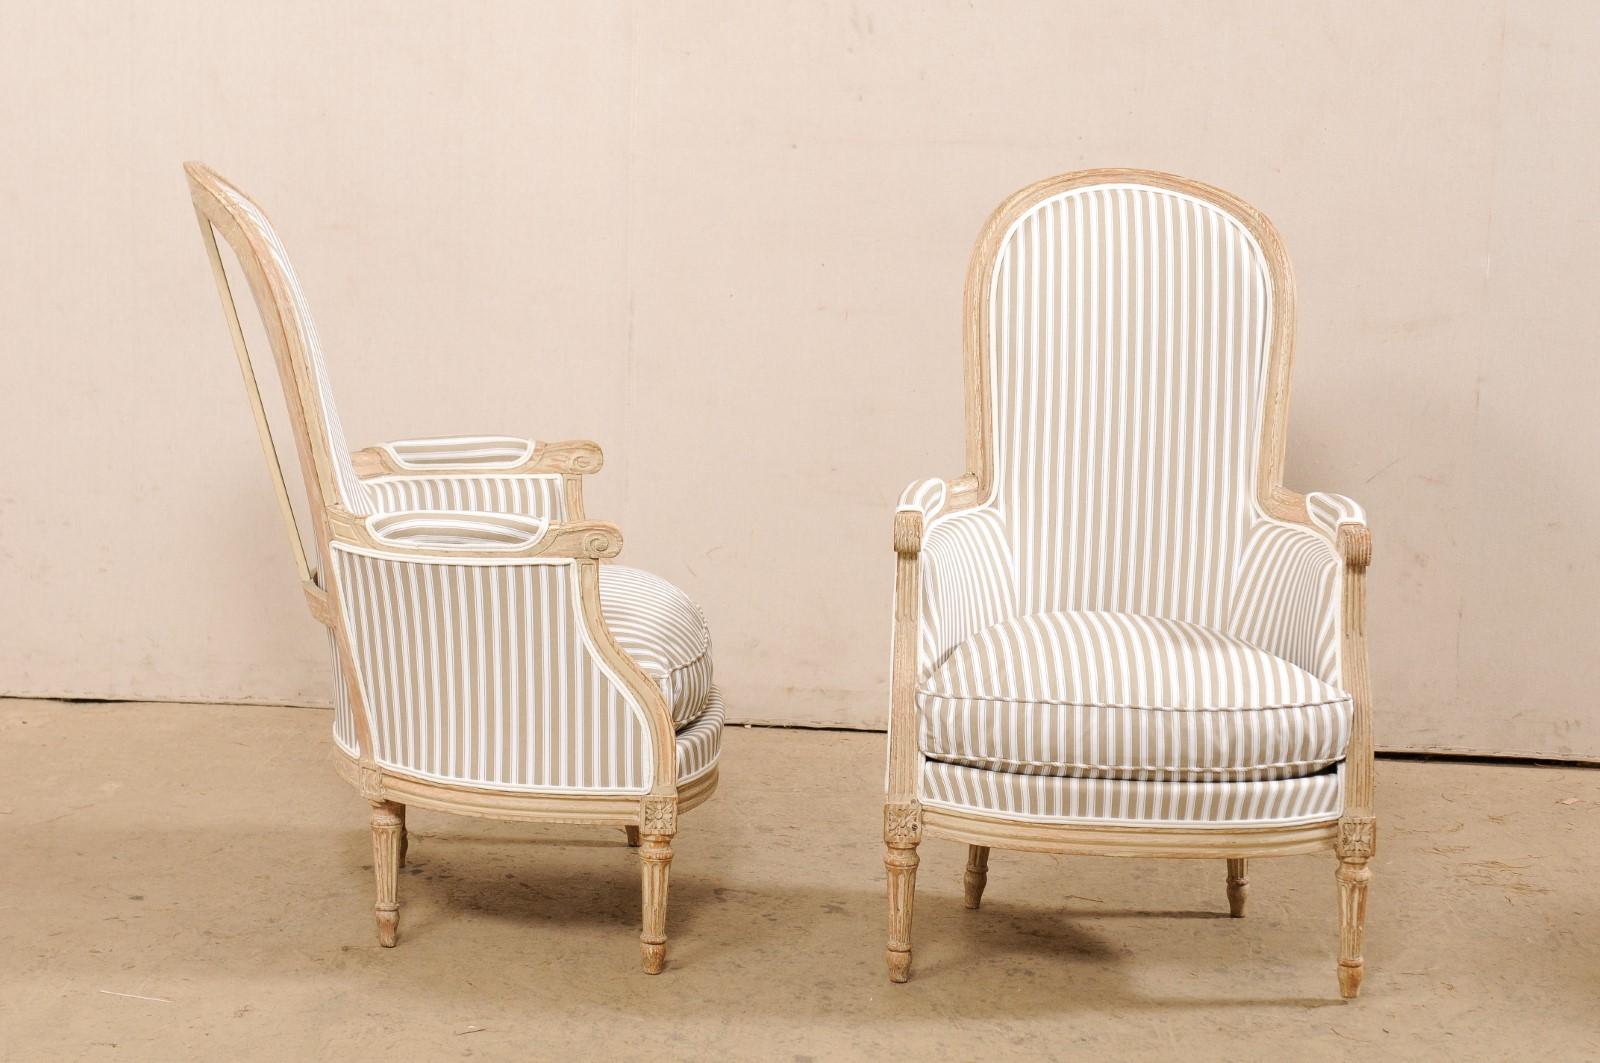 19th Century French Pair of Early 19th C. Bergère Chairs w/Tall Arched-Backs & New Upholstery